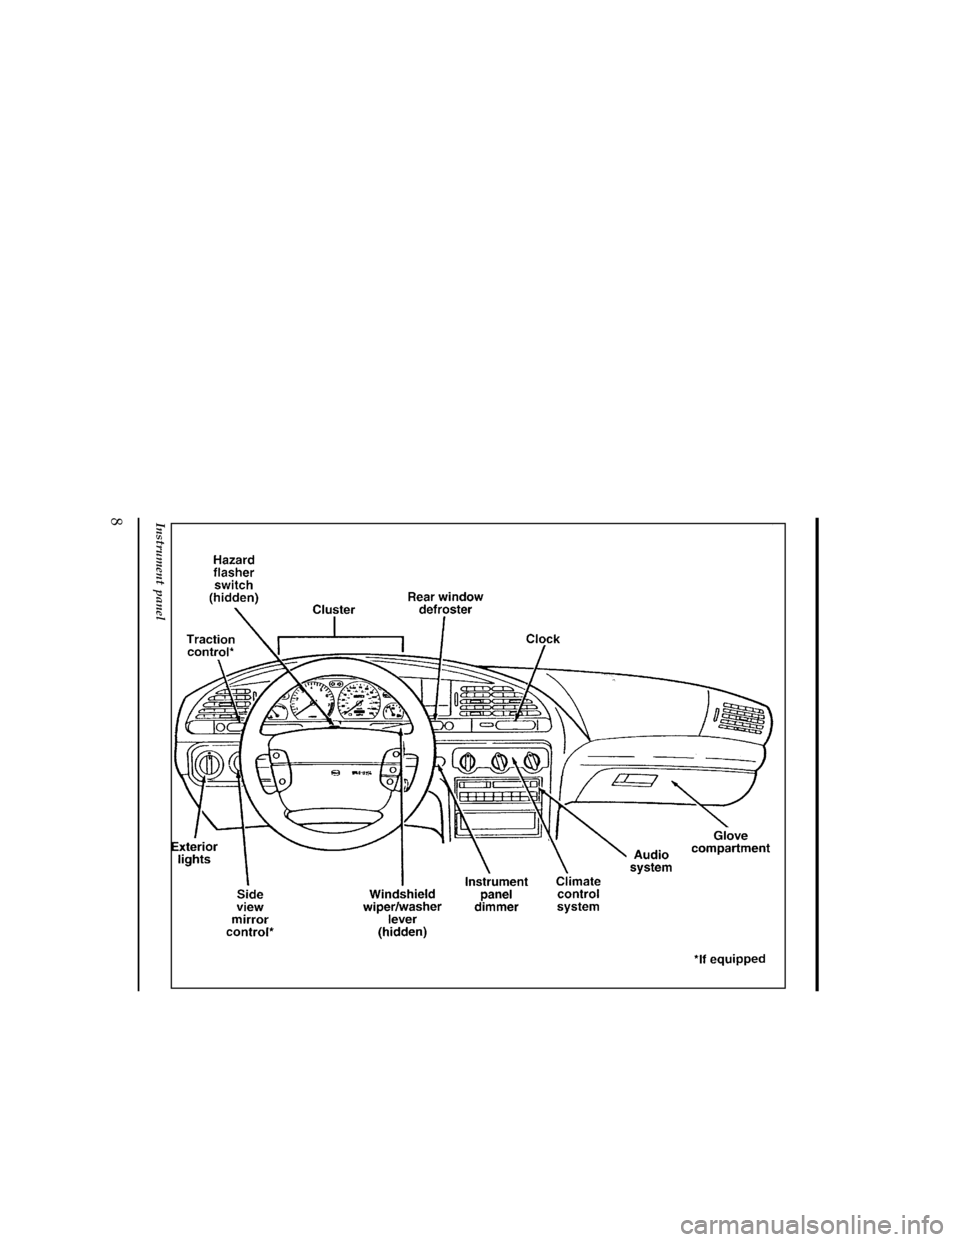 FORD CONTOUR 1997 2.G Owners Manual 8
[IS00500(O )02/96]
33-1/2 pica
art:0000289-H
Instrument panel
File:03cdiso.ex
Update:Thu Sep 12 10:58:17 1996 